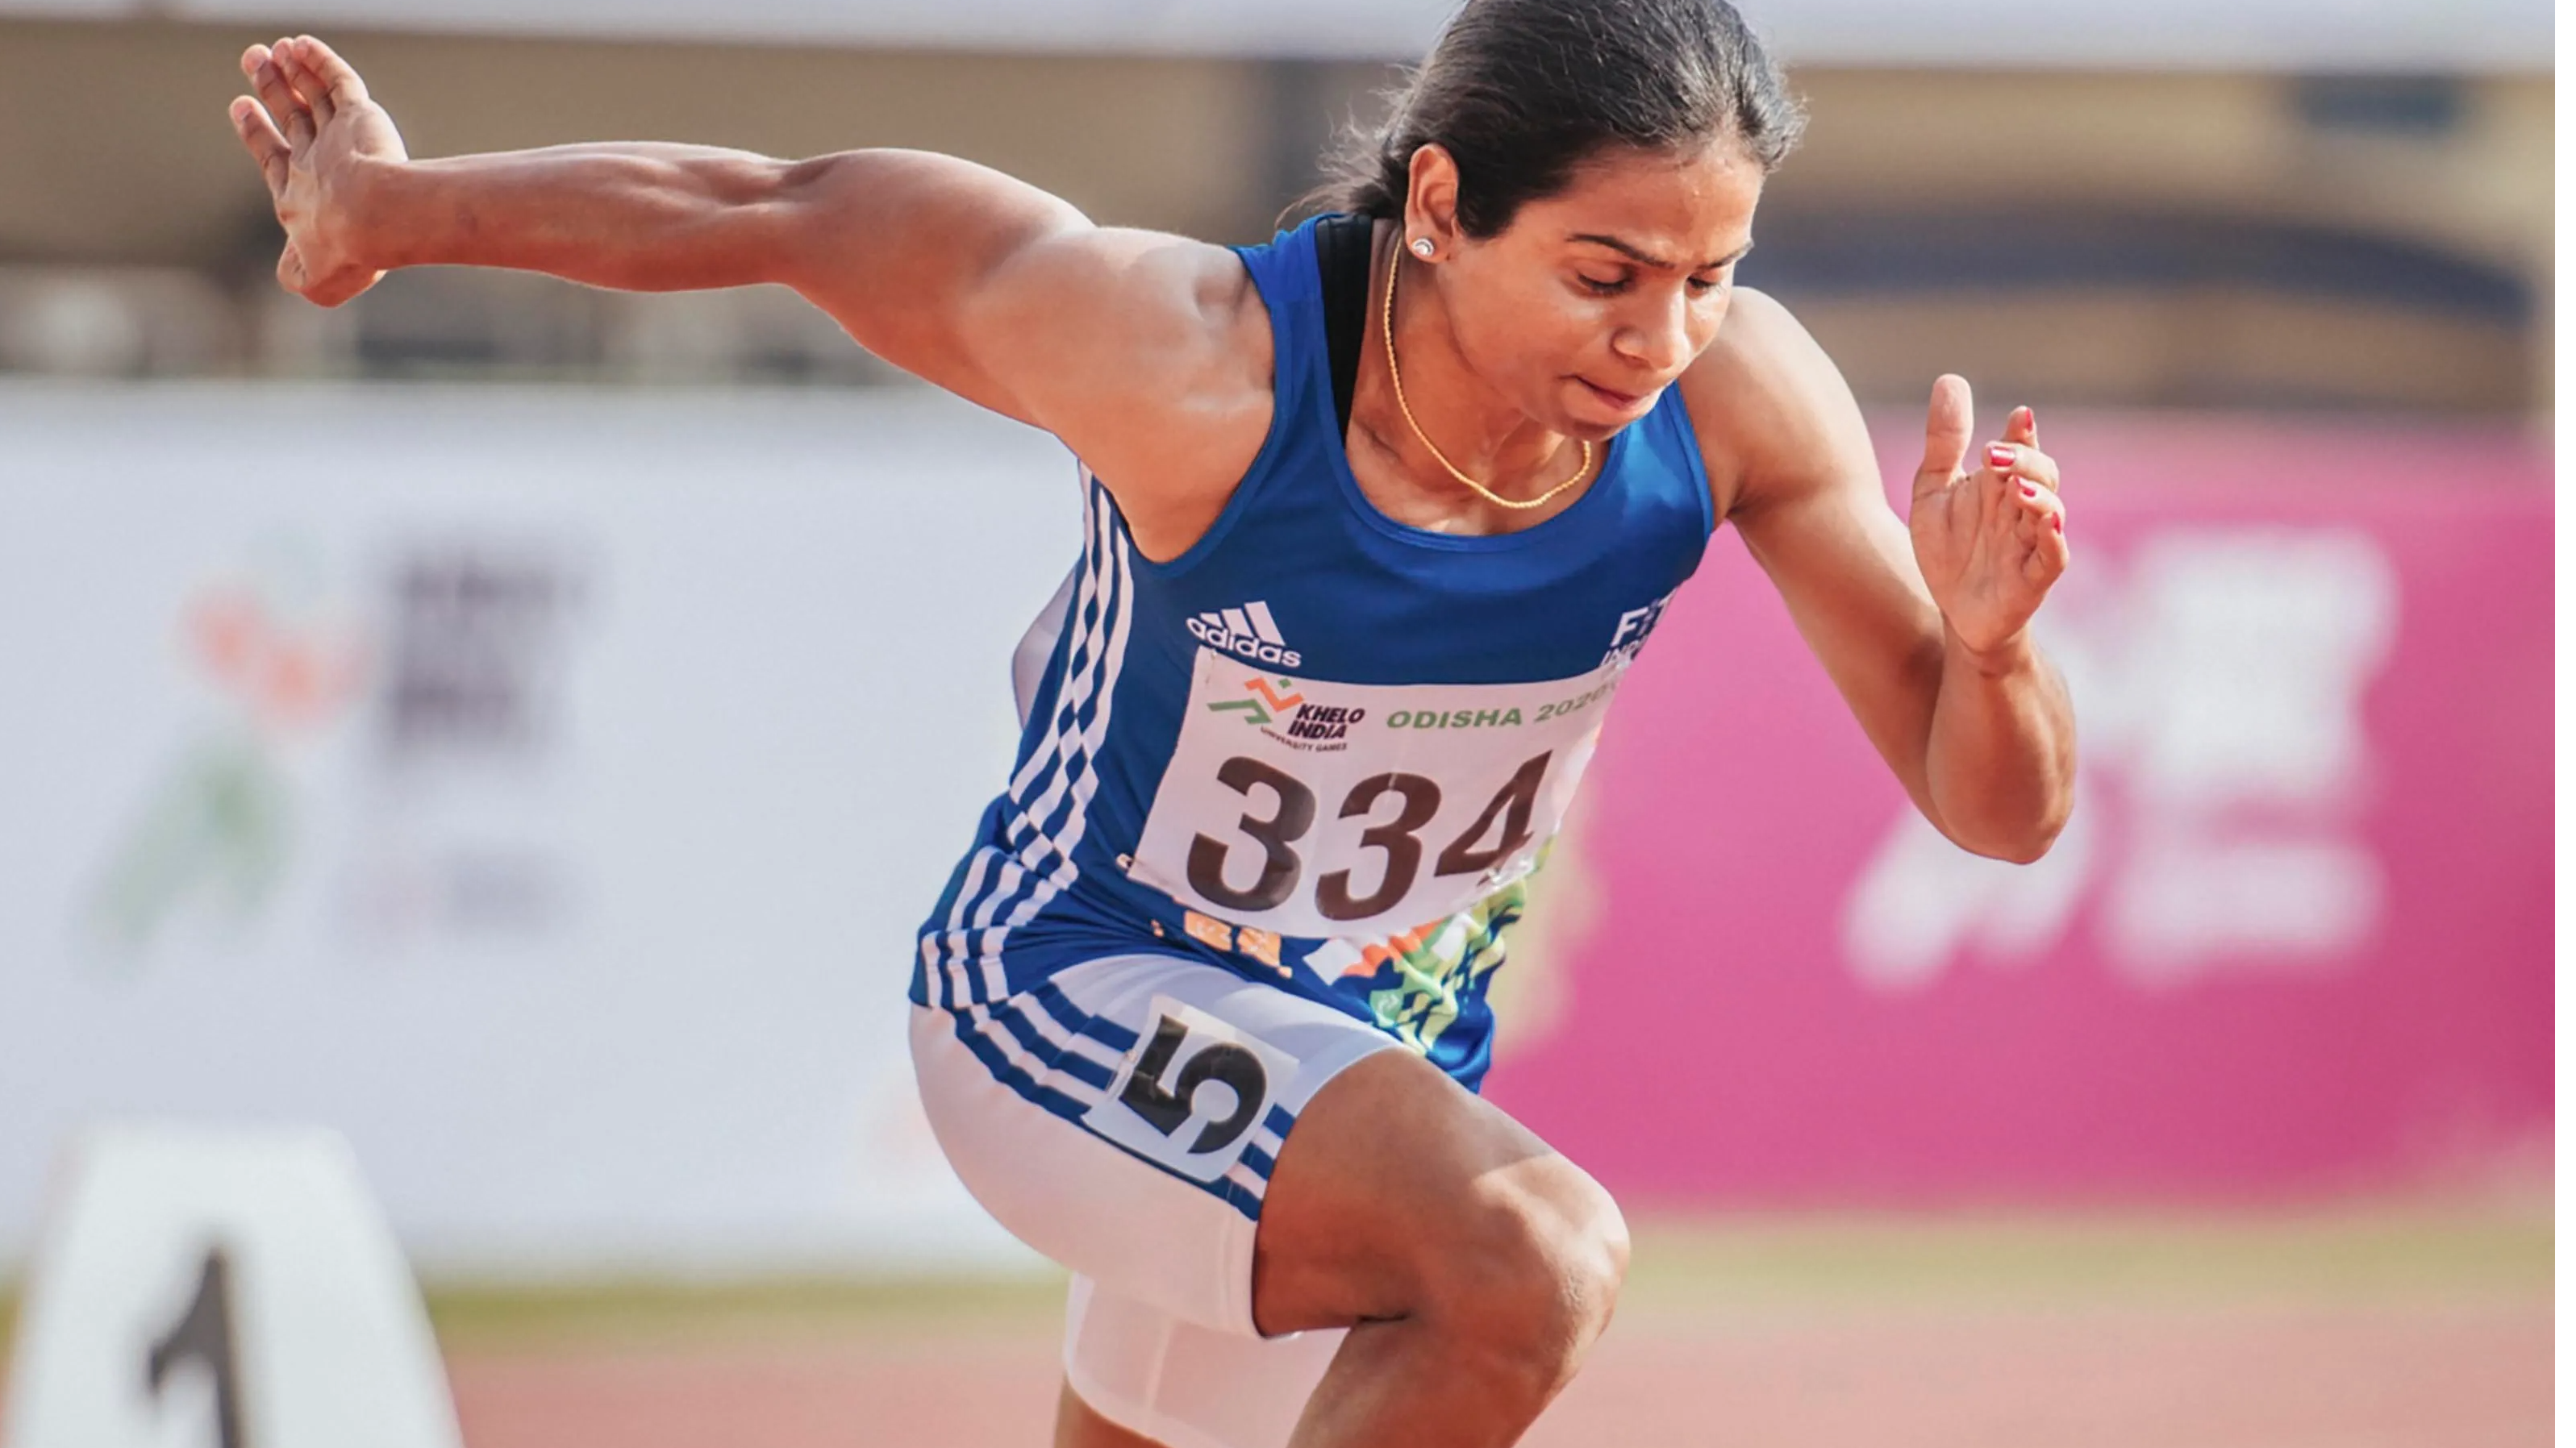 Tokyo Olympics: India’s Dutee Chand finishes 8th in women’s 200m heat